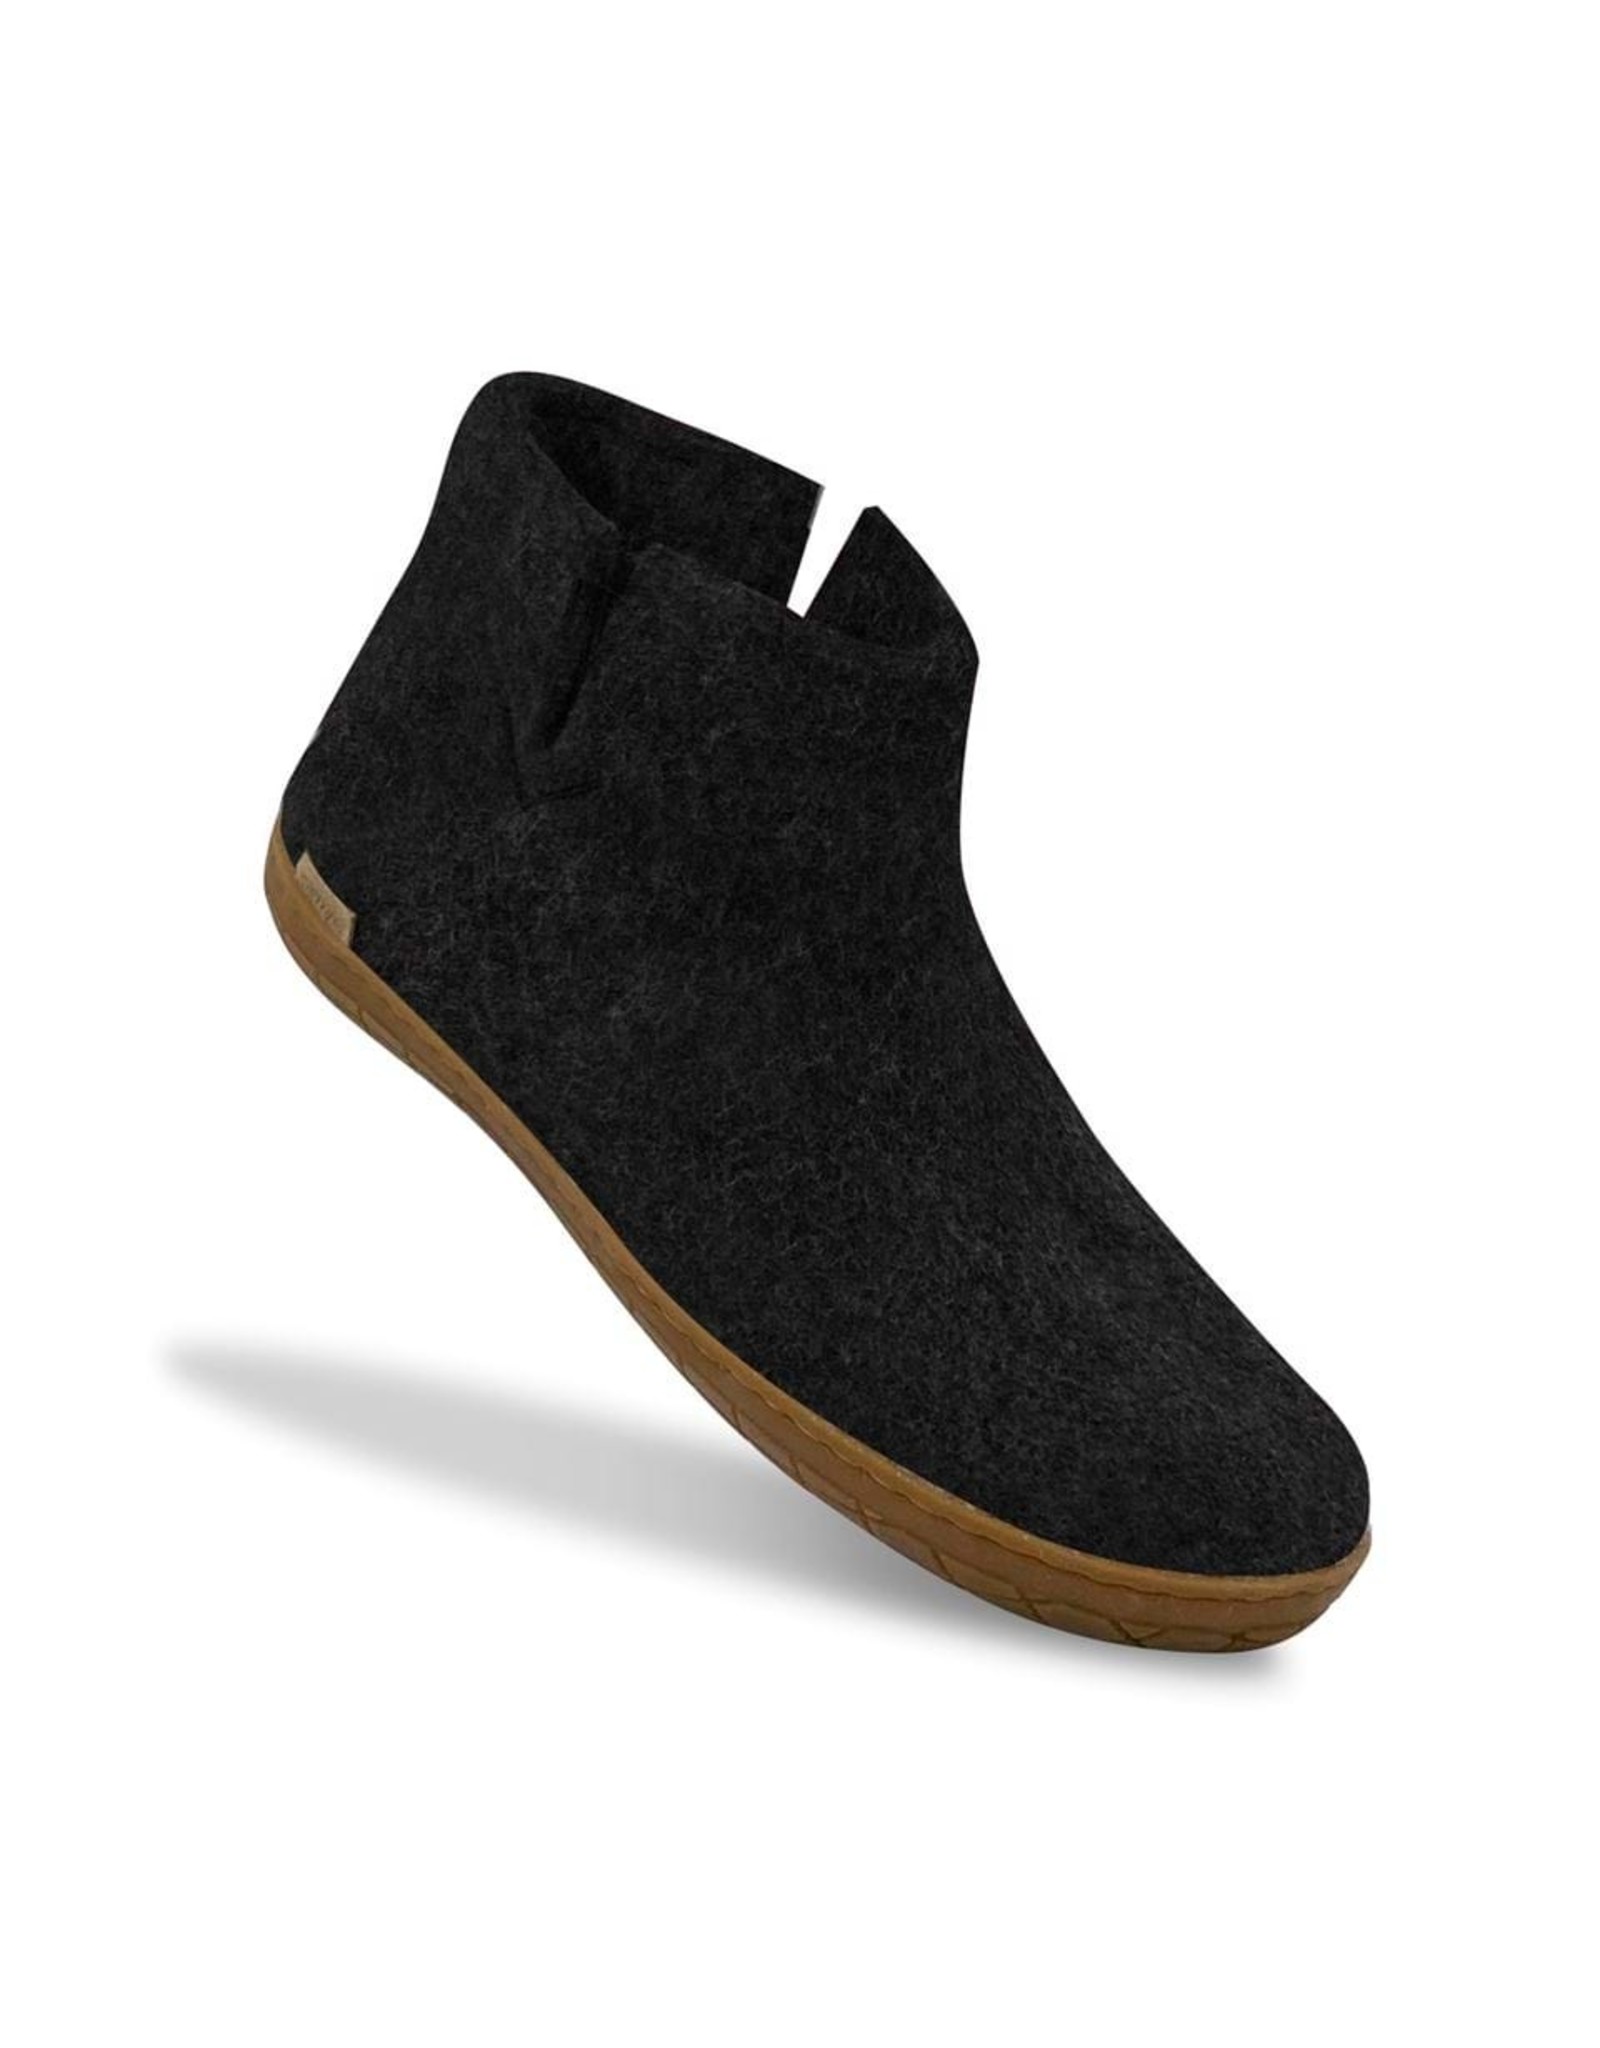 GLERUPS BOOT SLIPPER WITH RUBBER SOLE-CHARCOAL